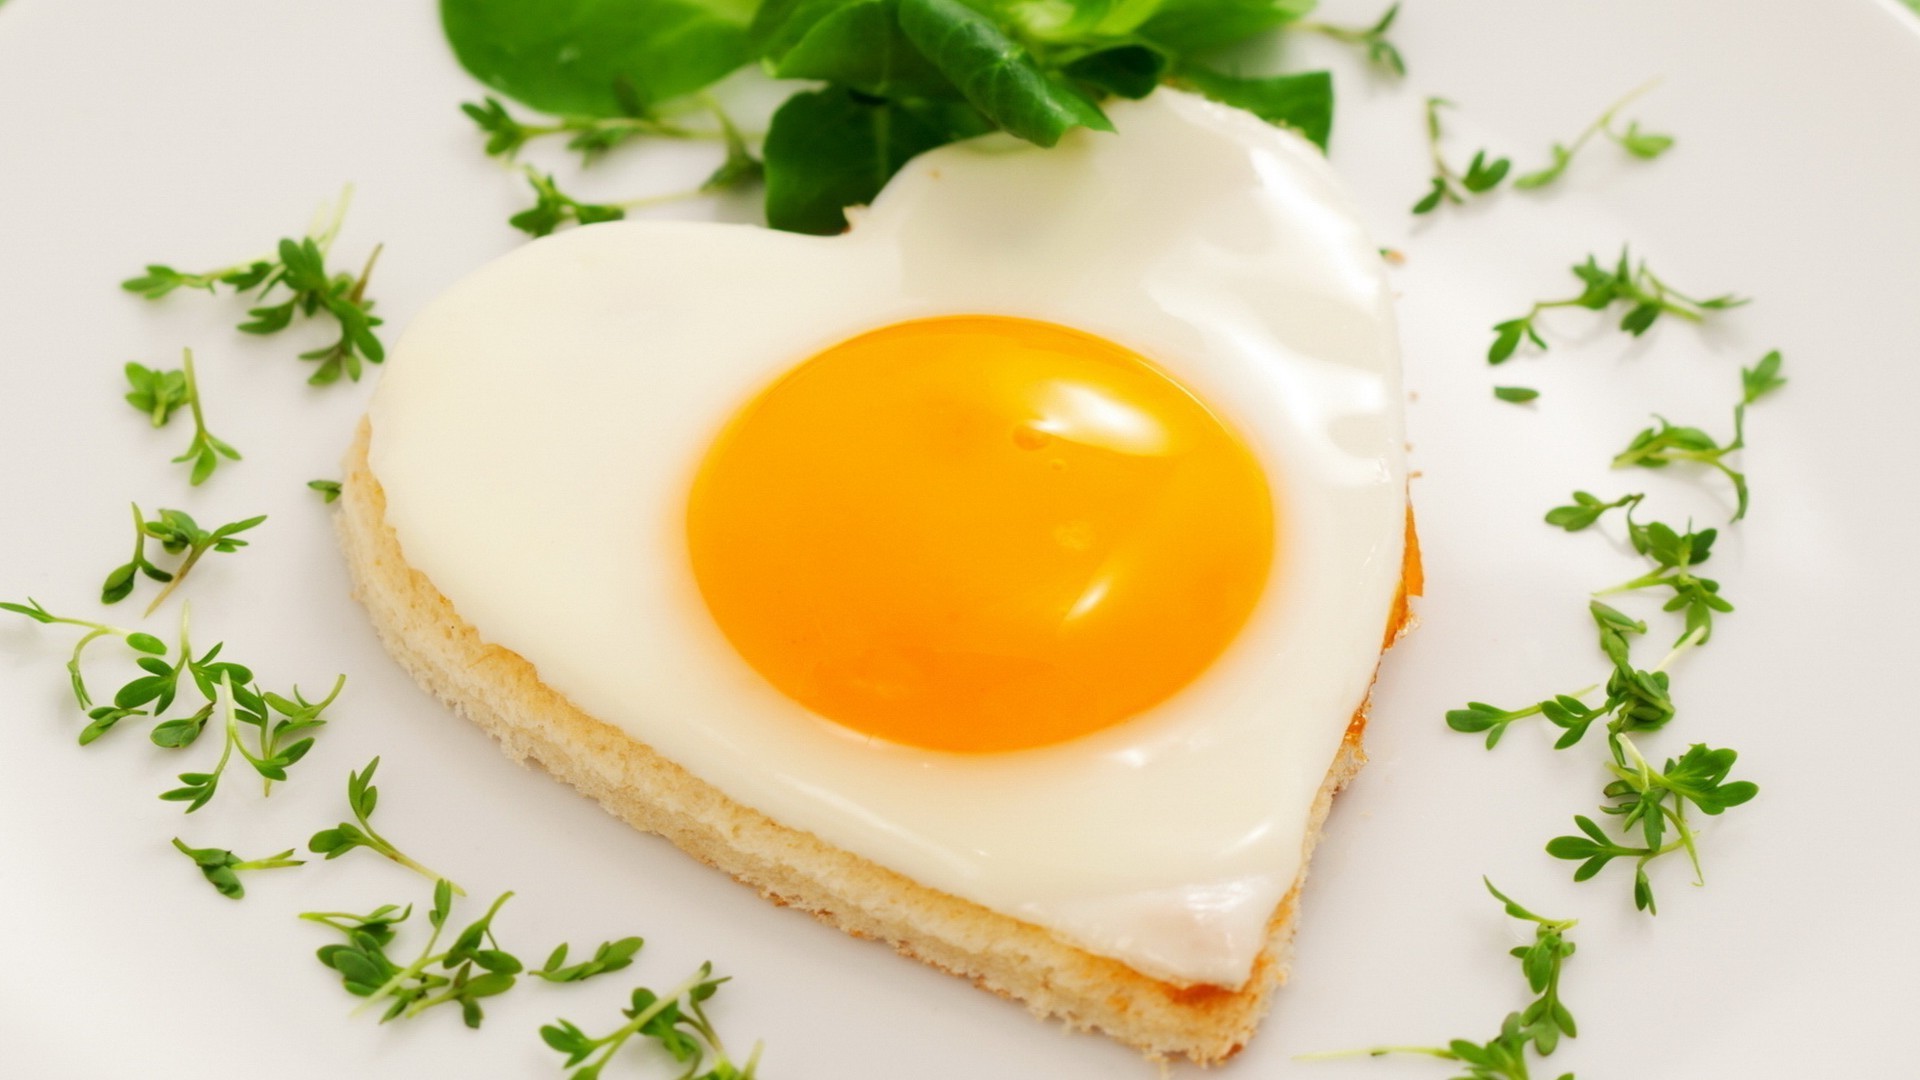 breakfast egg egg yolk food nutrition toast delicious dairy product dawn meal lunch cooking leaf bread butter healthy plate cholesterol